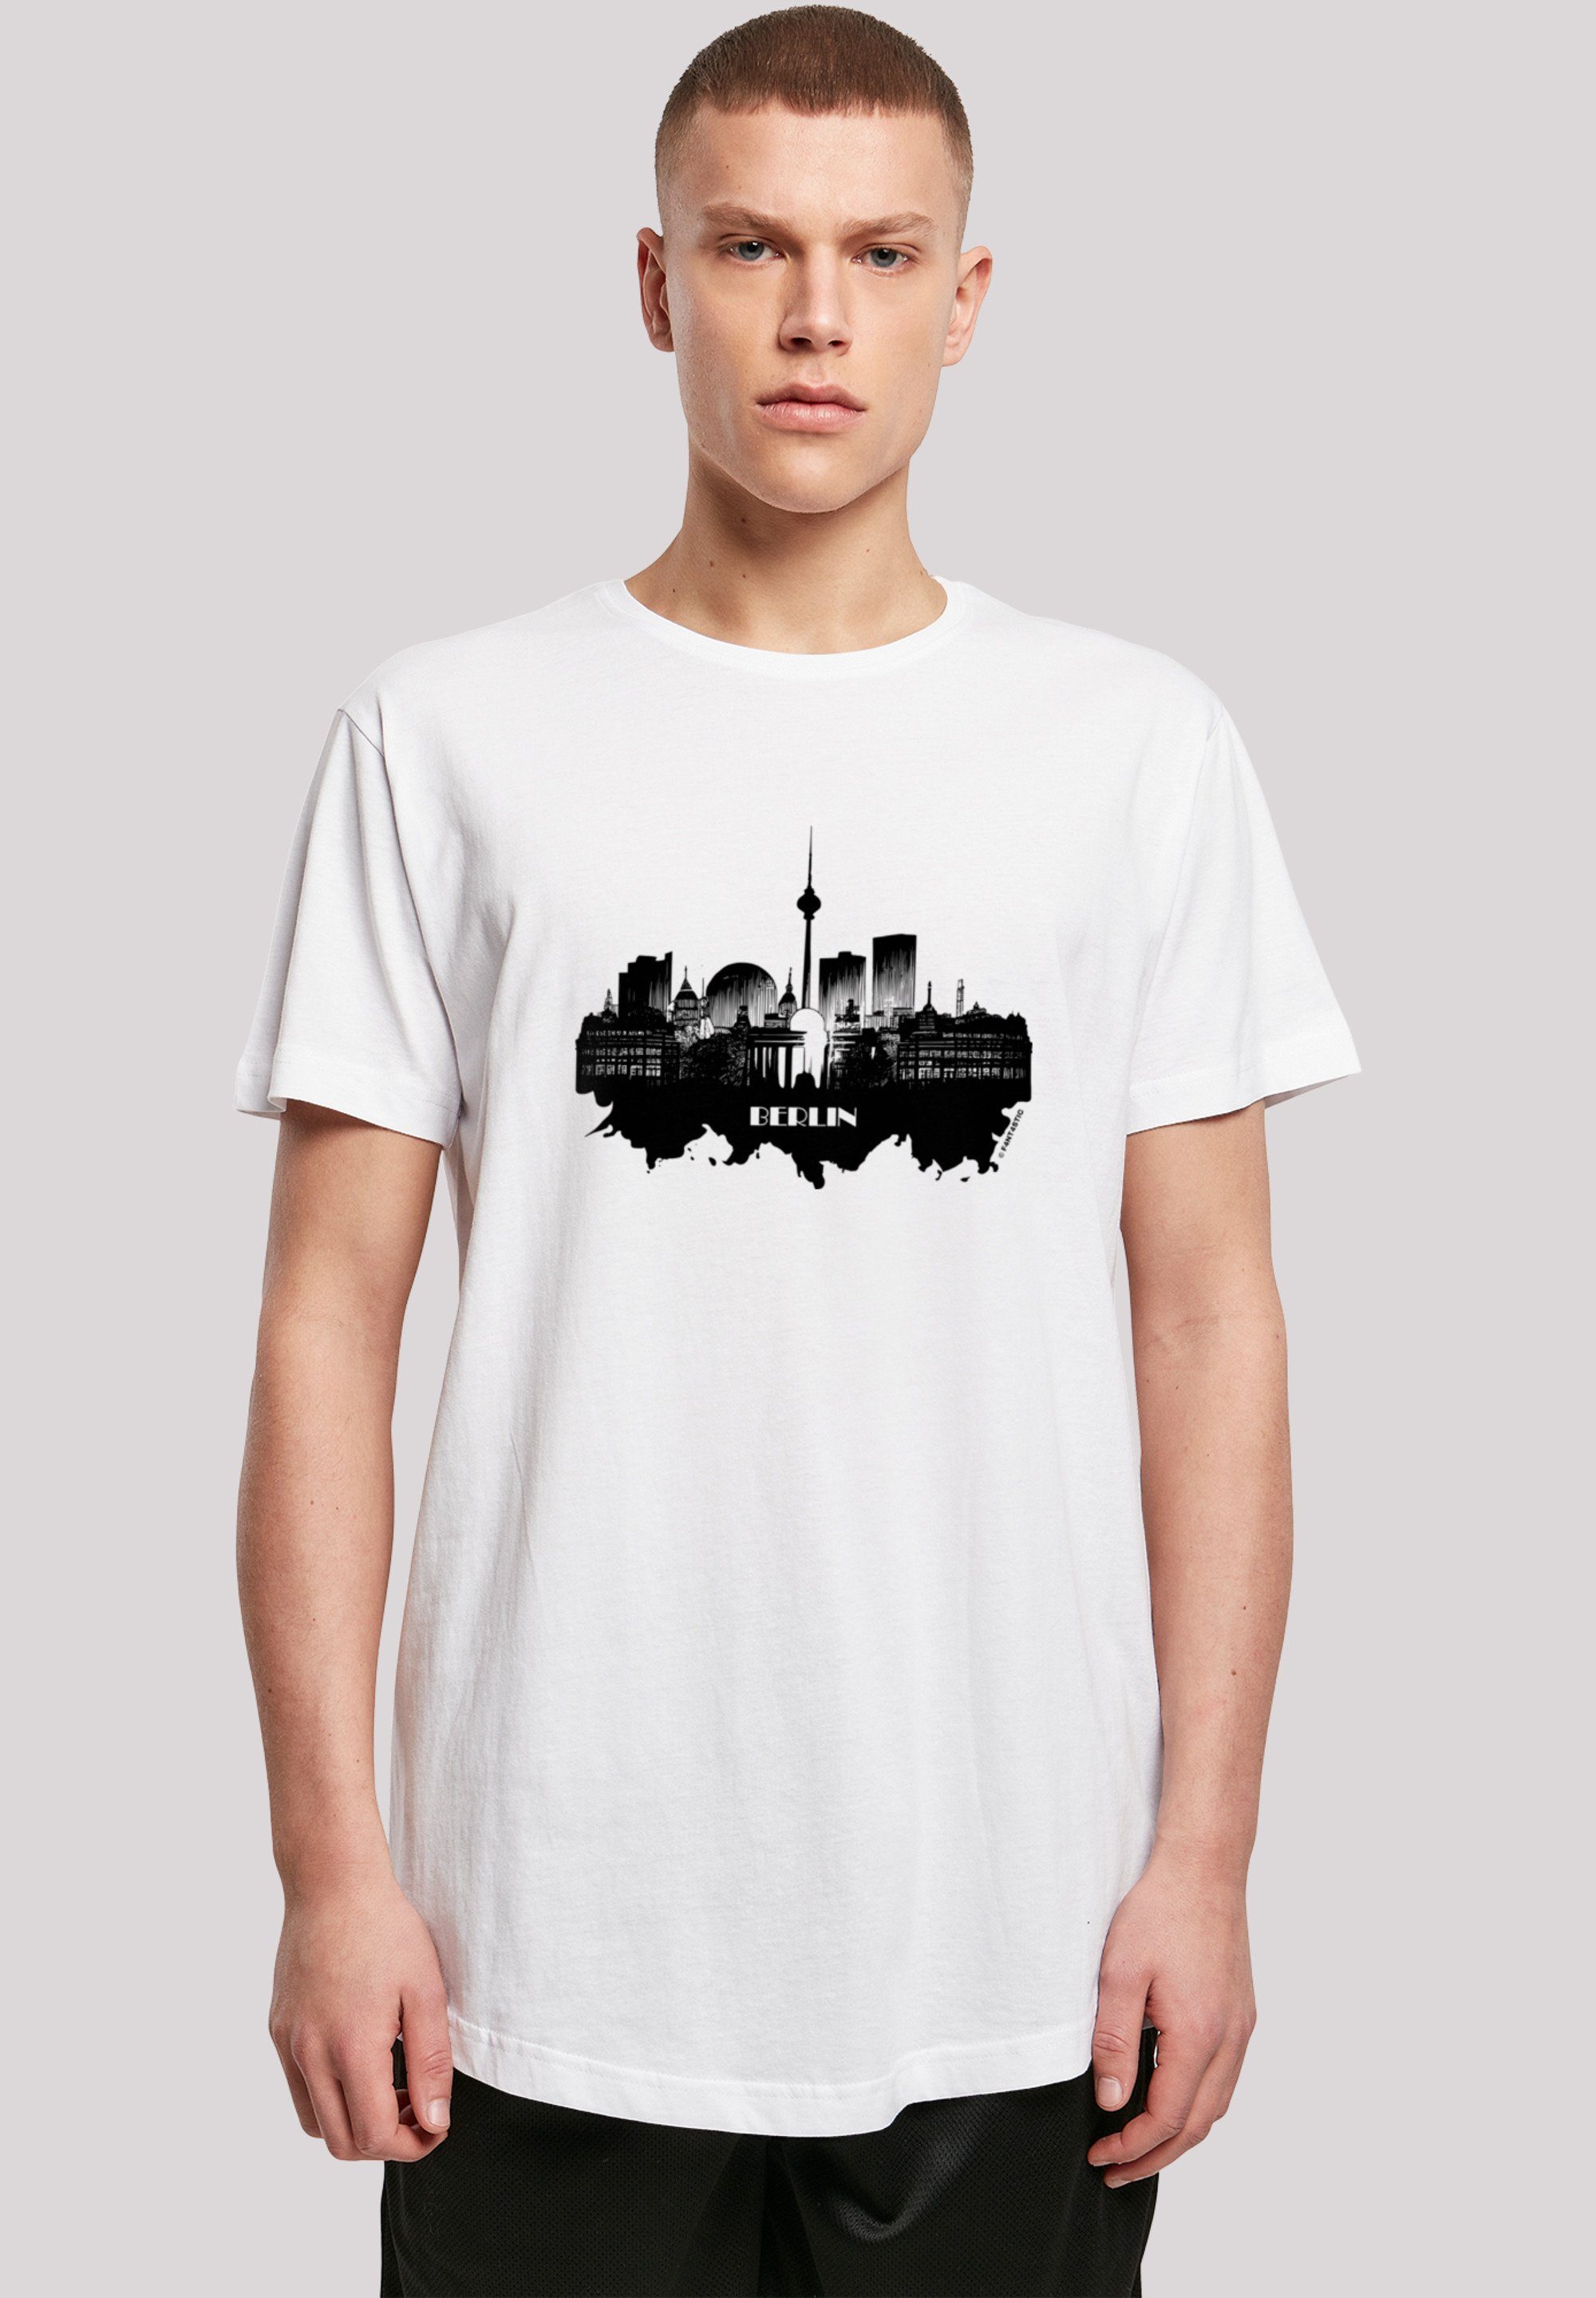 F4NT4STIC T-Shirt Cities Collection - Berlin skyline Print